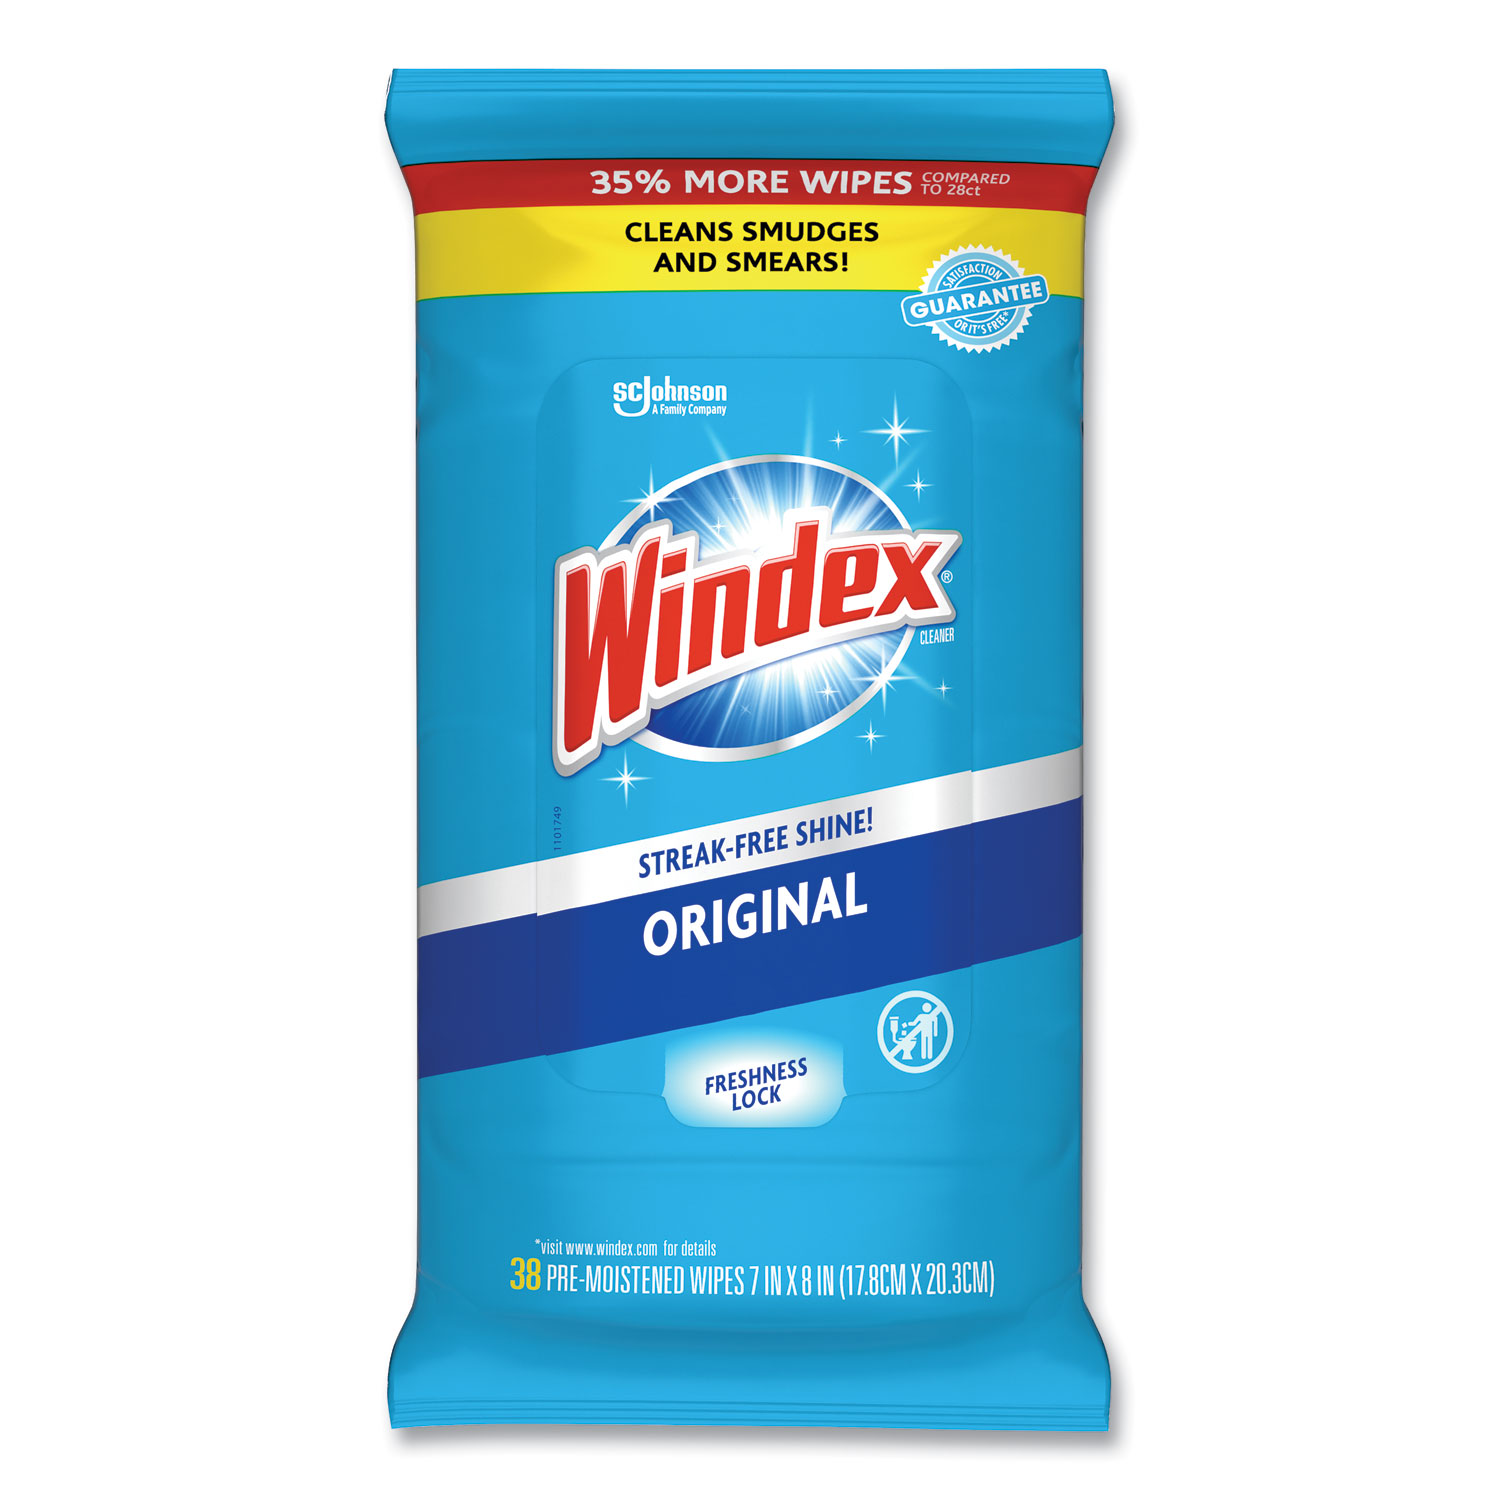 Windex Electronics Cleaner 25 Wipes Per Pack Case Of 12 Packs